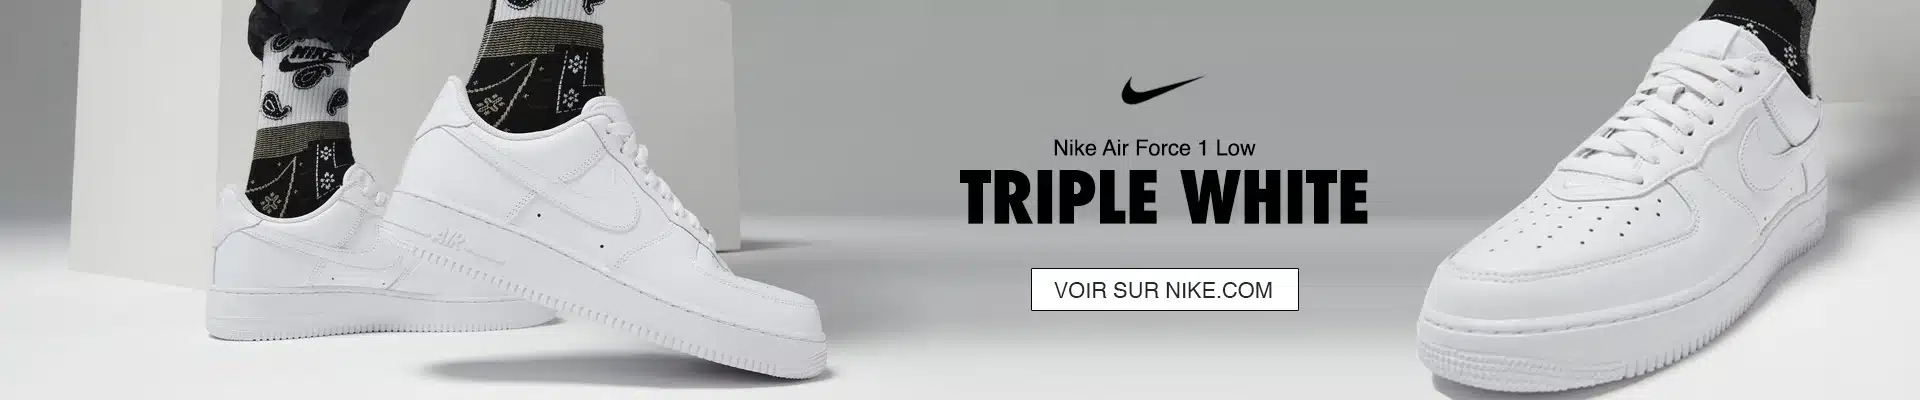 nike philippines Air Force Triple White